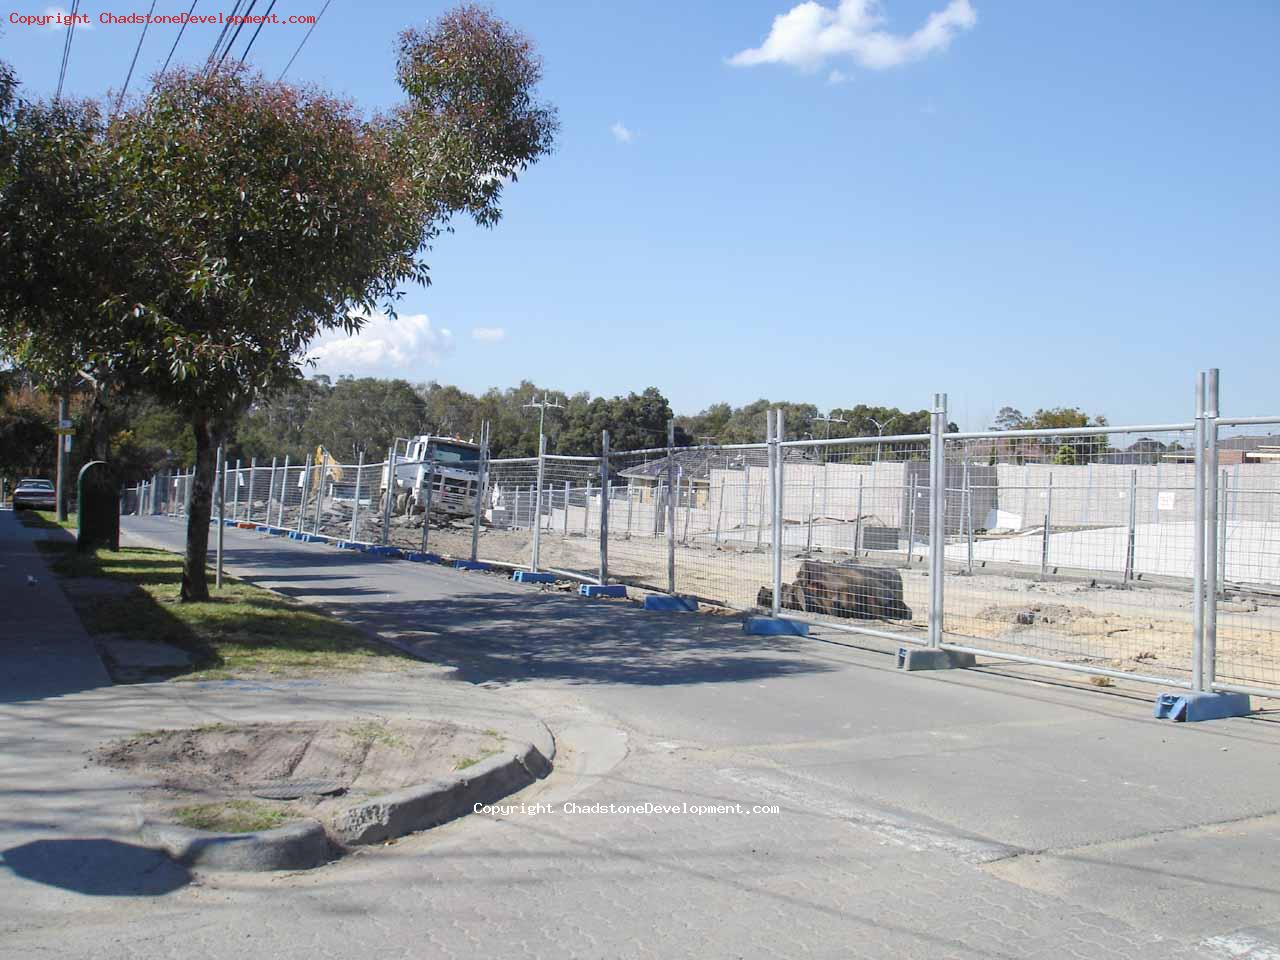 Fenced off area as seen from Webster St - Chadstone Development Discussions